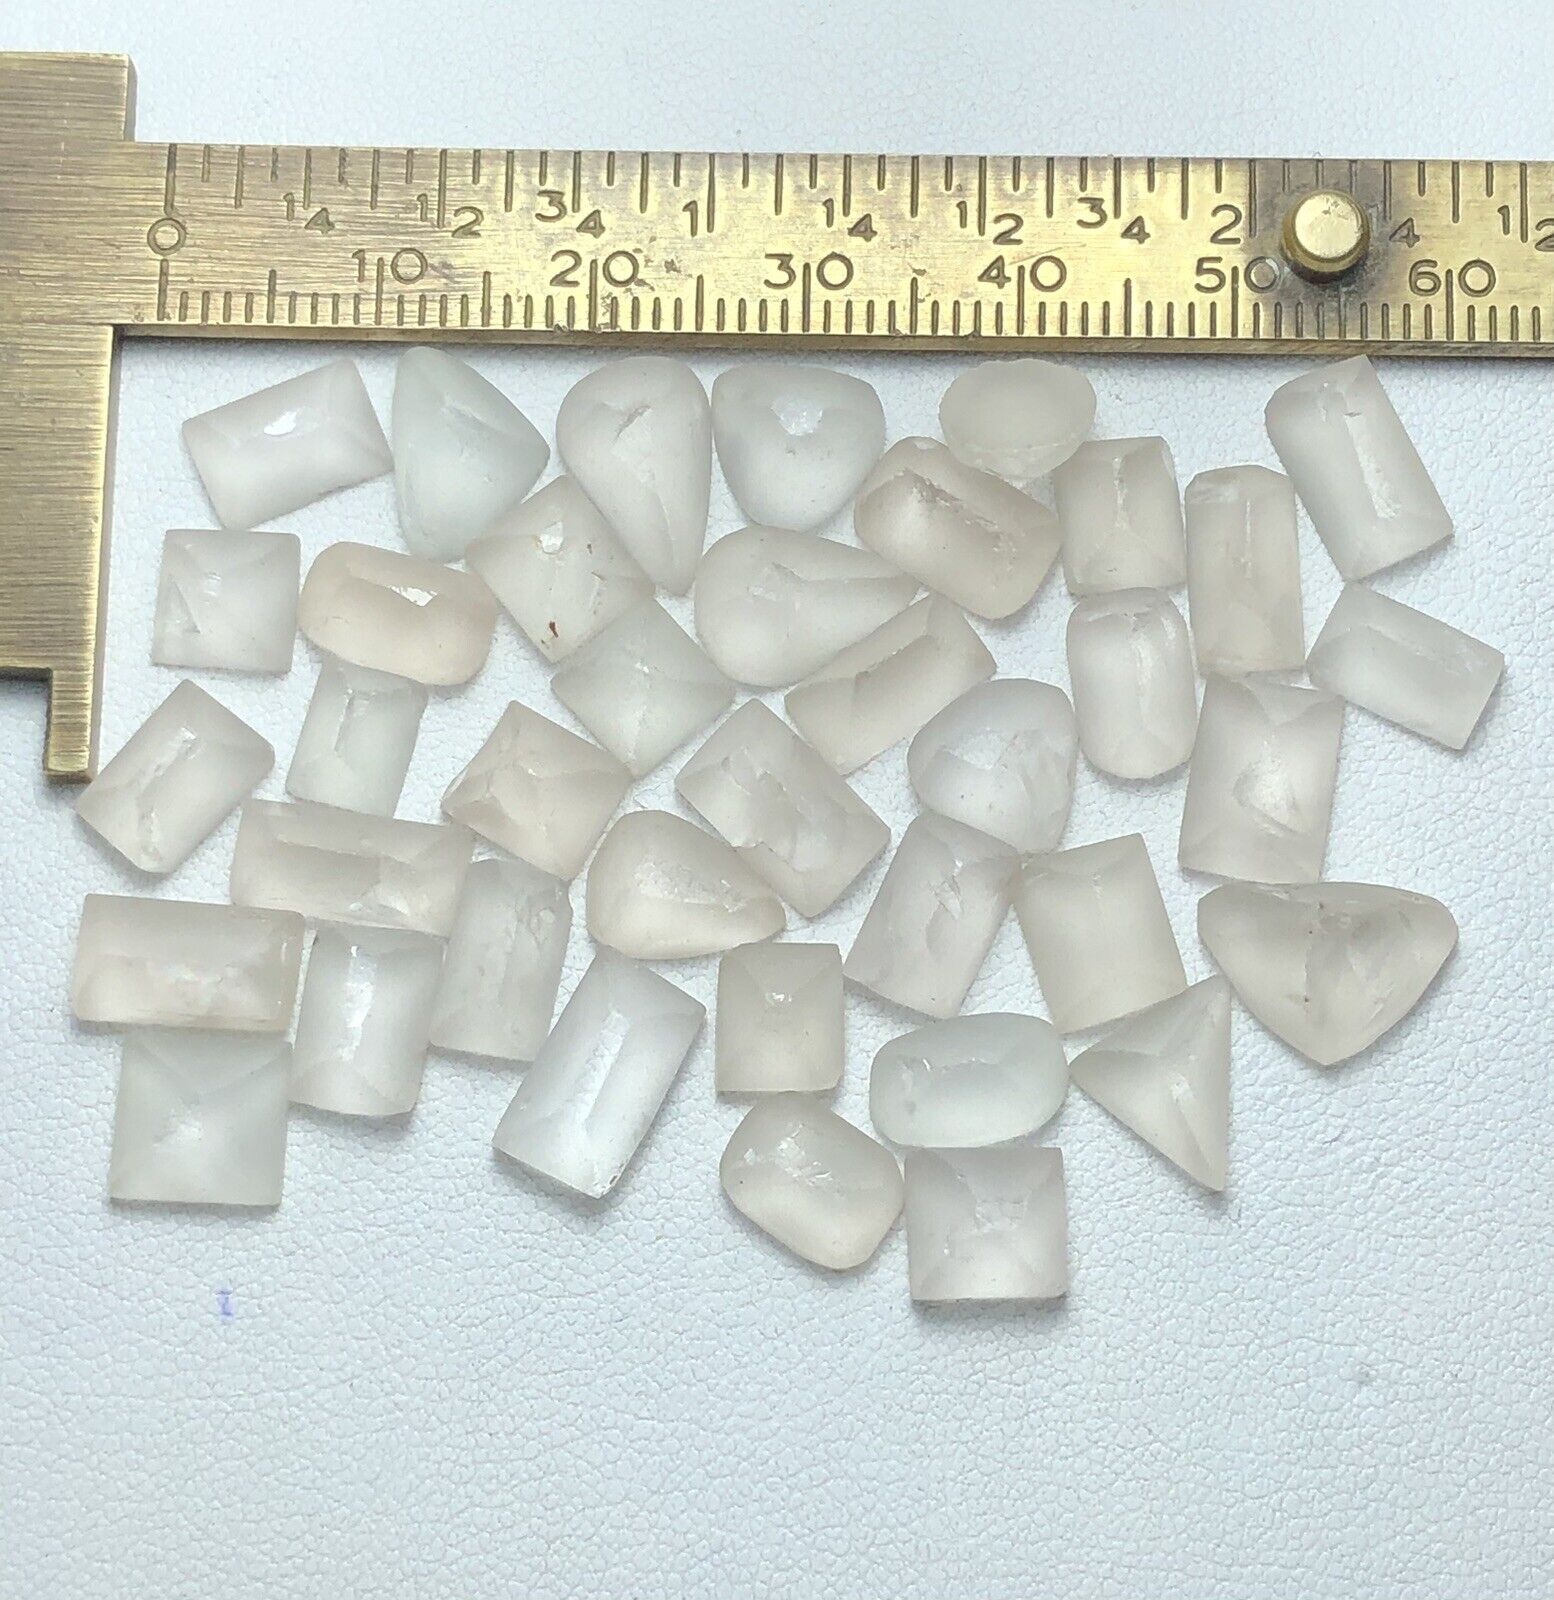 138 Crt / 38 Piece / Natural Morganite Preformed Shapes, Ready For Faceted Gems